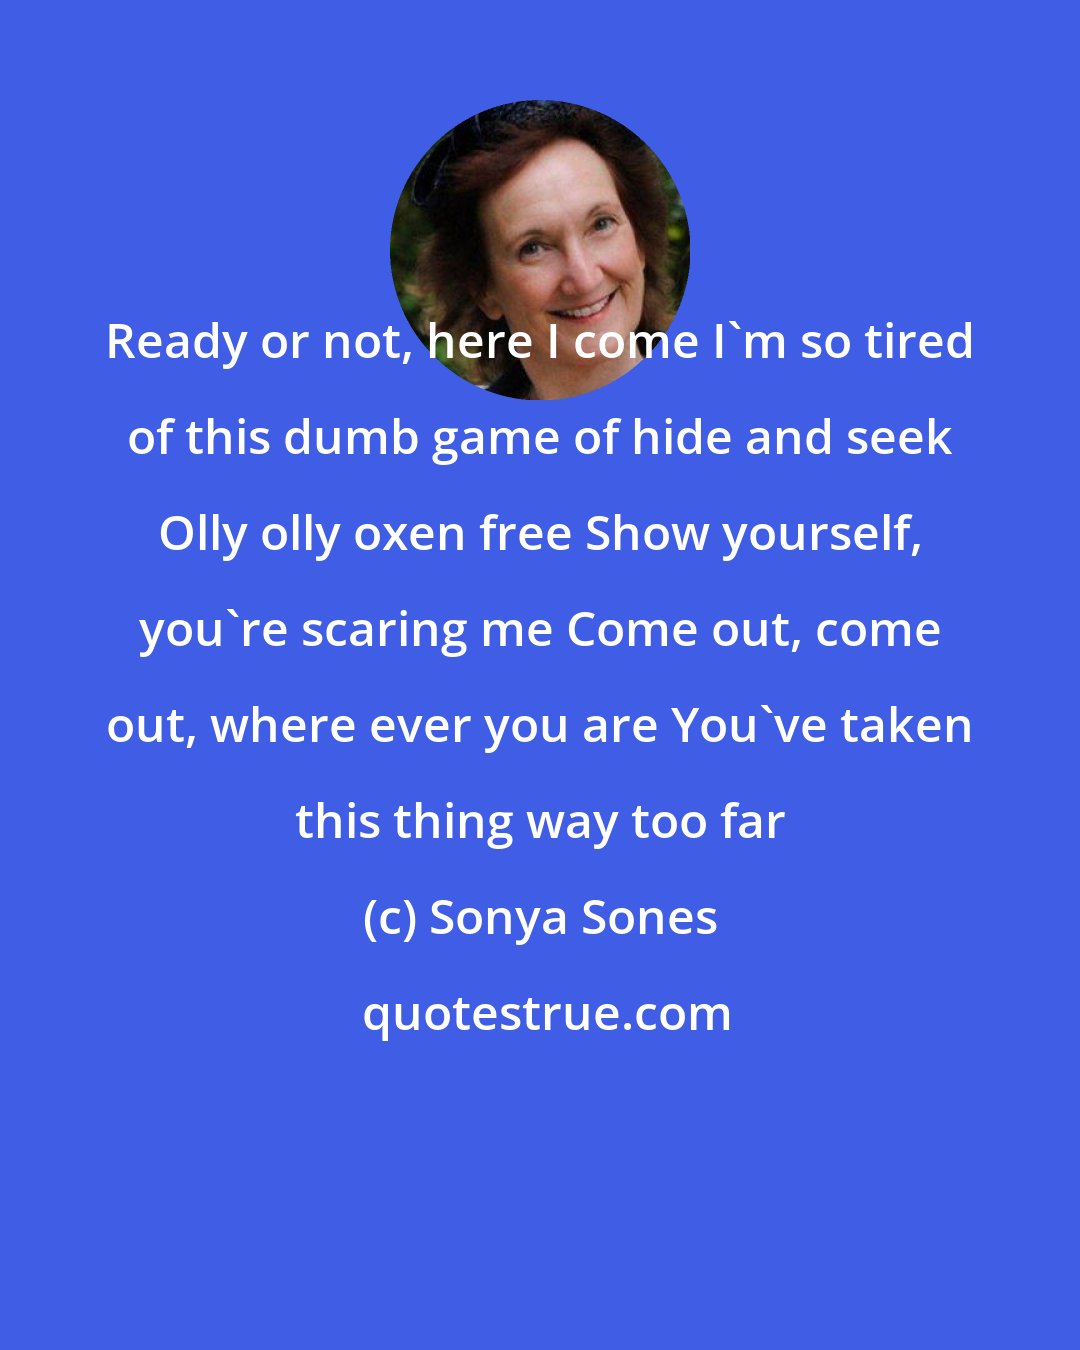 Sonya Sones: Ready or not, here I come I'm so tired of this dumb game of hide and seek Olly olly oxen free Show yourself, you're scaring me Come out, come out, where ever you are You've taken this thing way too far